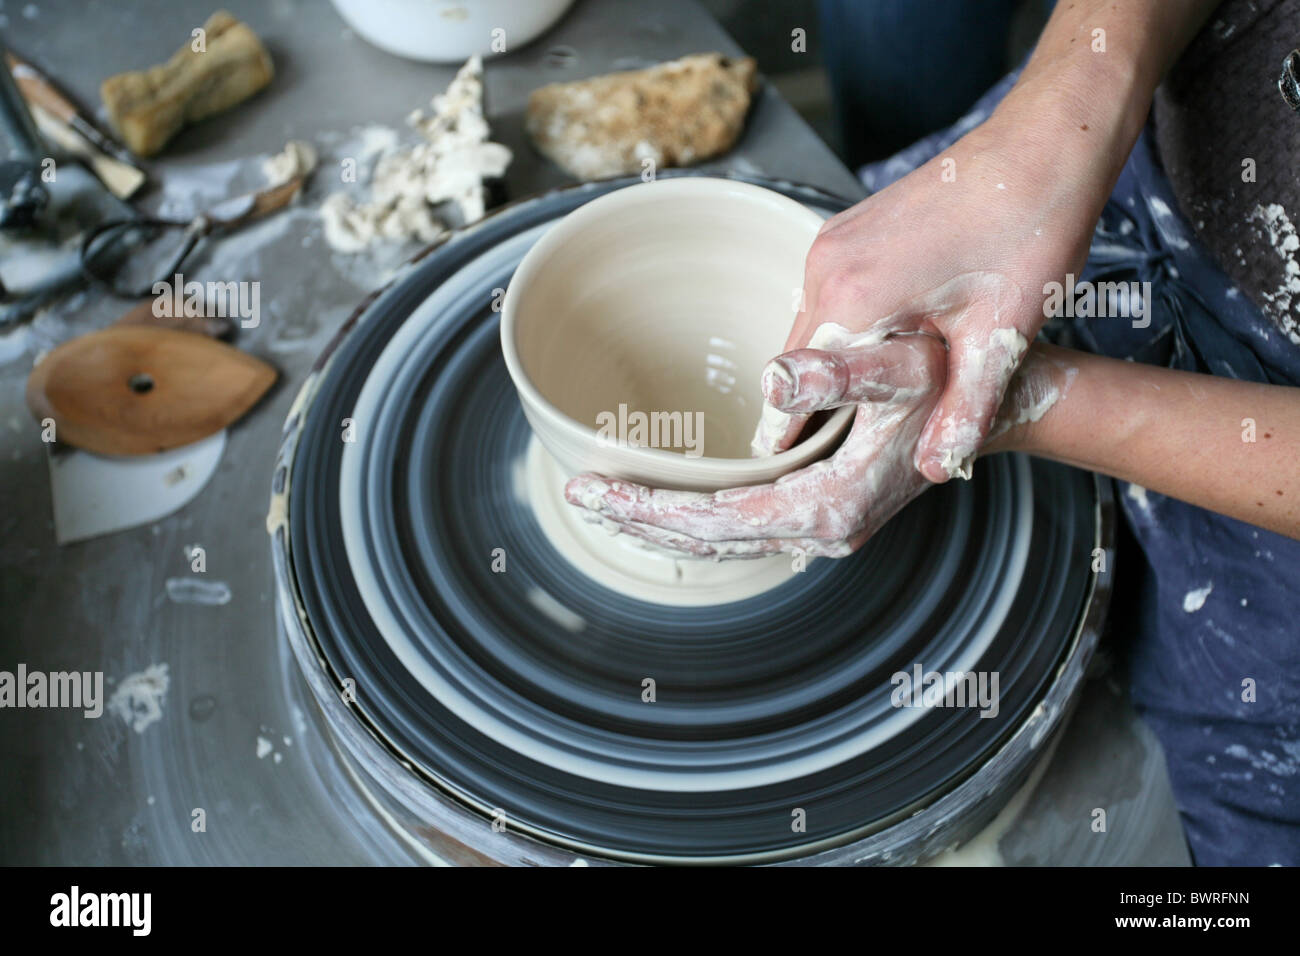 Pottery Ceramic Potteries Creativ Hands Woman Shaping Wheel Handwork Work Working Female potter Stock Photo